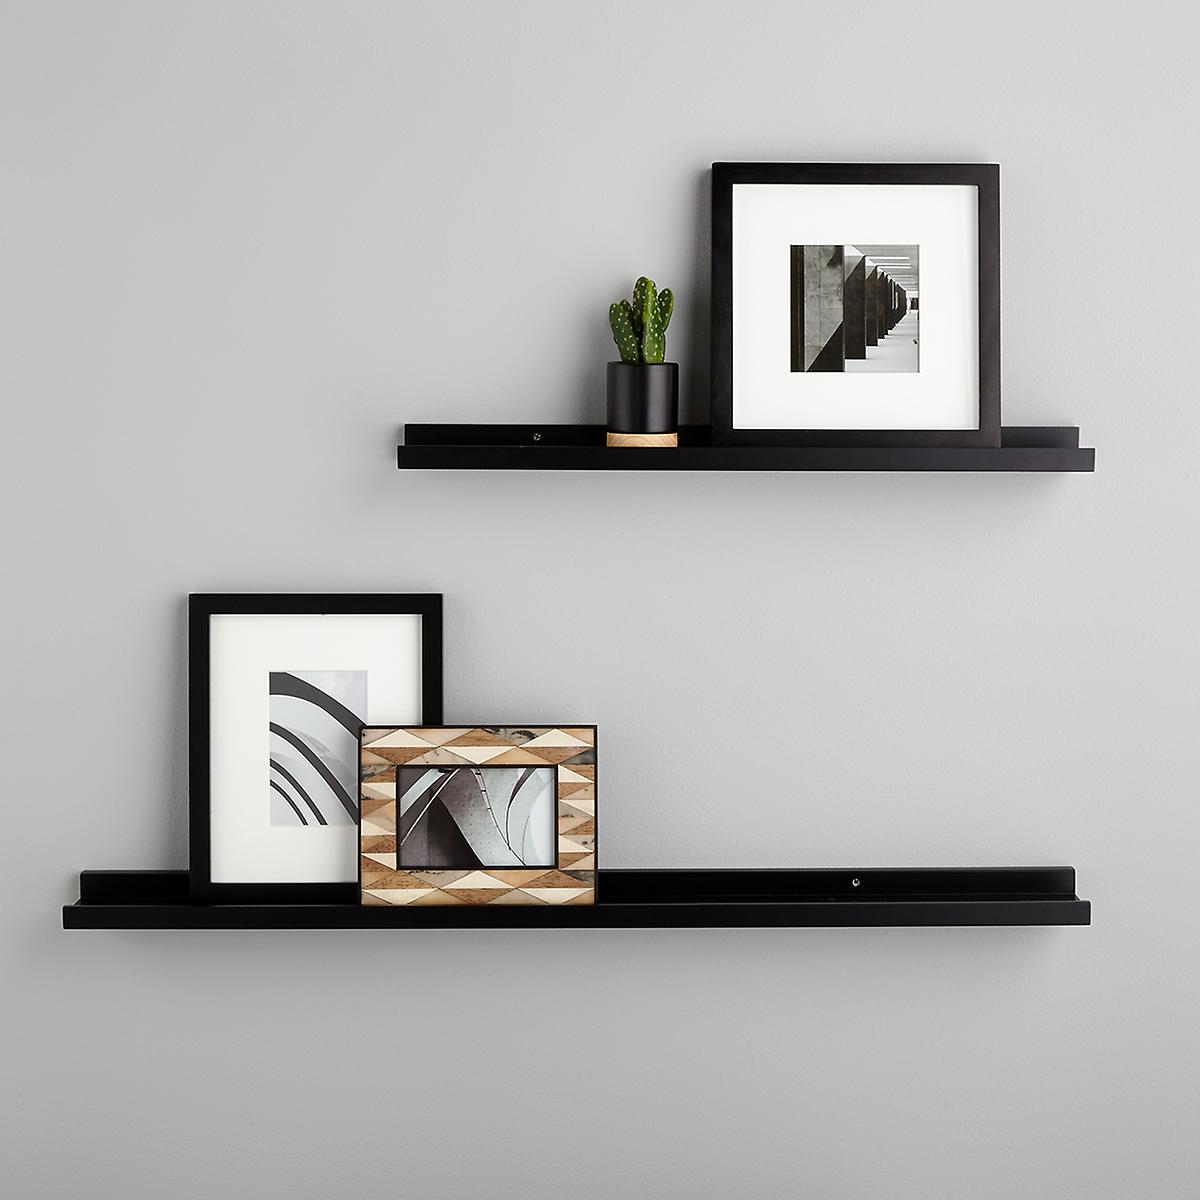 black ledge wall shelves the container shelf floating for frames modern open kitchen ideas study table with bookshelf make own solid wood brackets chimney brush canadian tire over